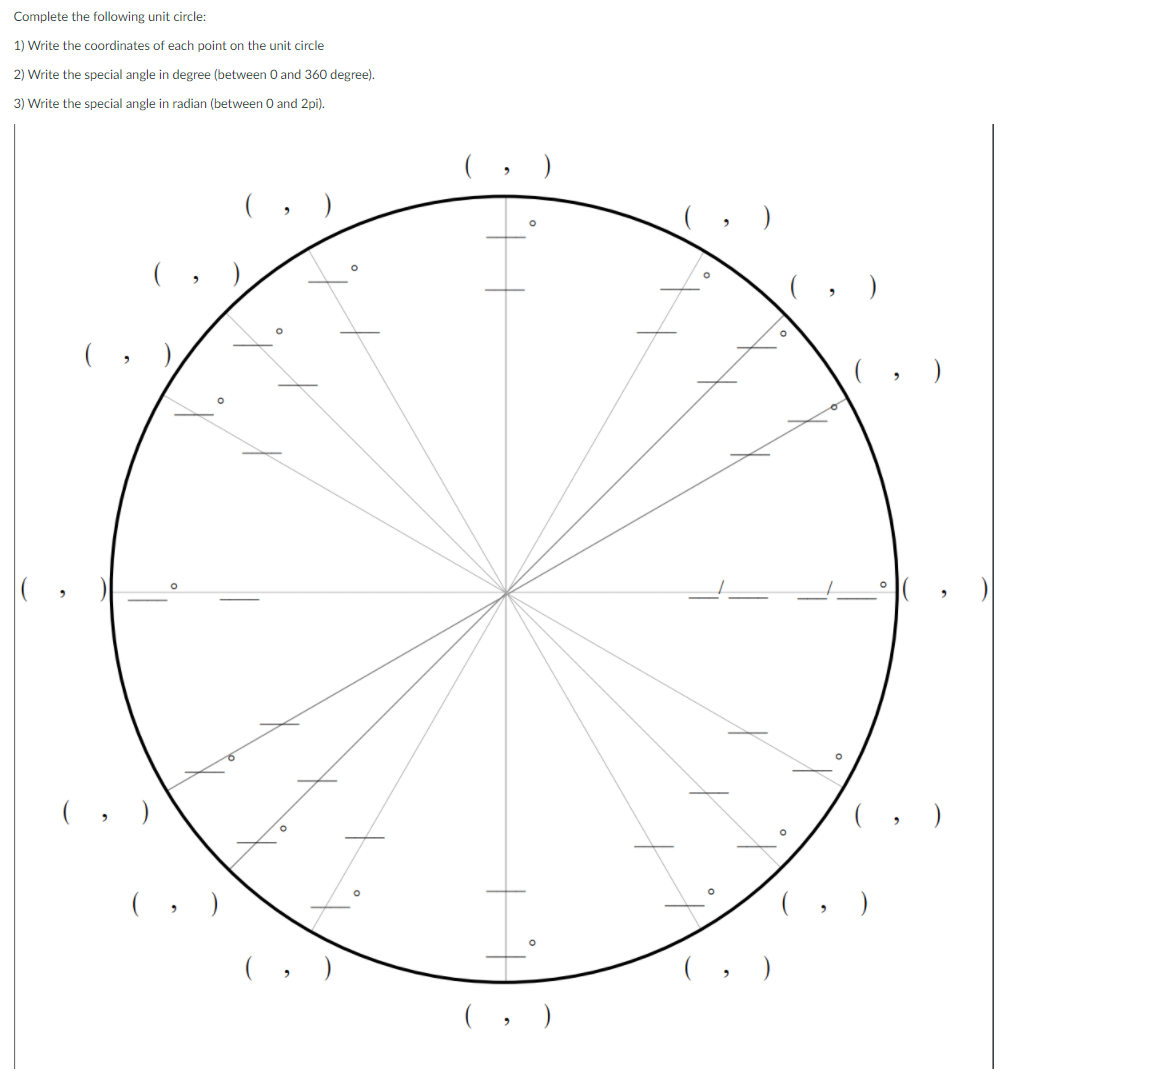 Complete the following unit circle:
1) Write the coordinates of each point on the unit circle
2) Write the special angle in degree (between O and 360 degree).
3) Write the special angle in radian (between 0 and 2pi).
